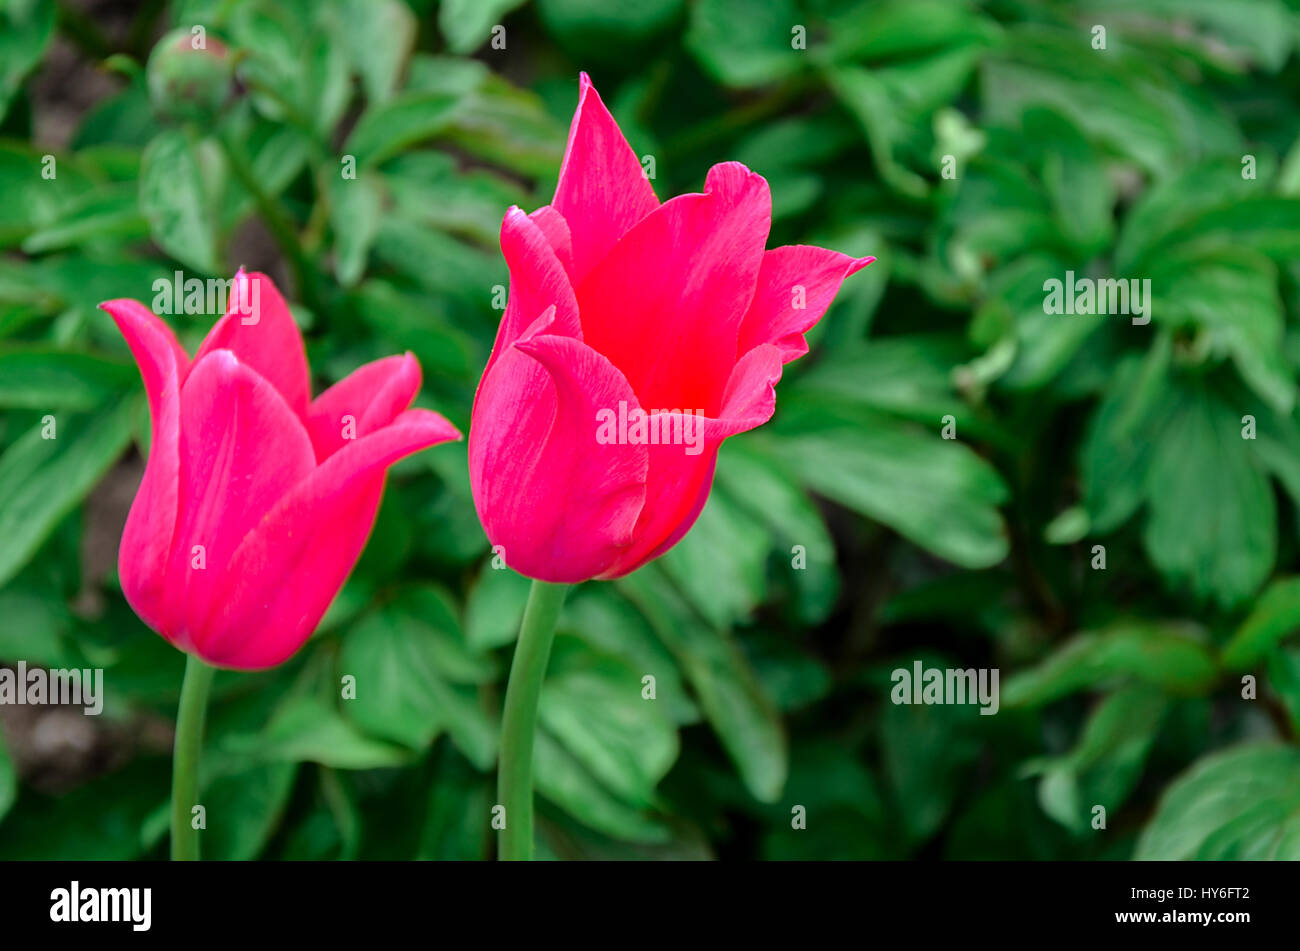 Flowering tulips on a flowerbed in a garden in the spring. Stock Photo